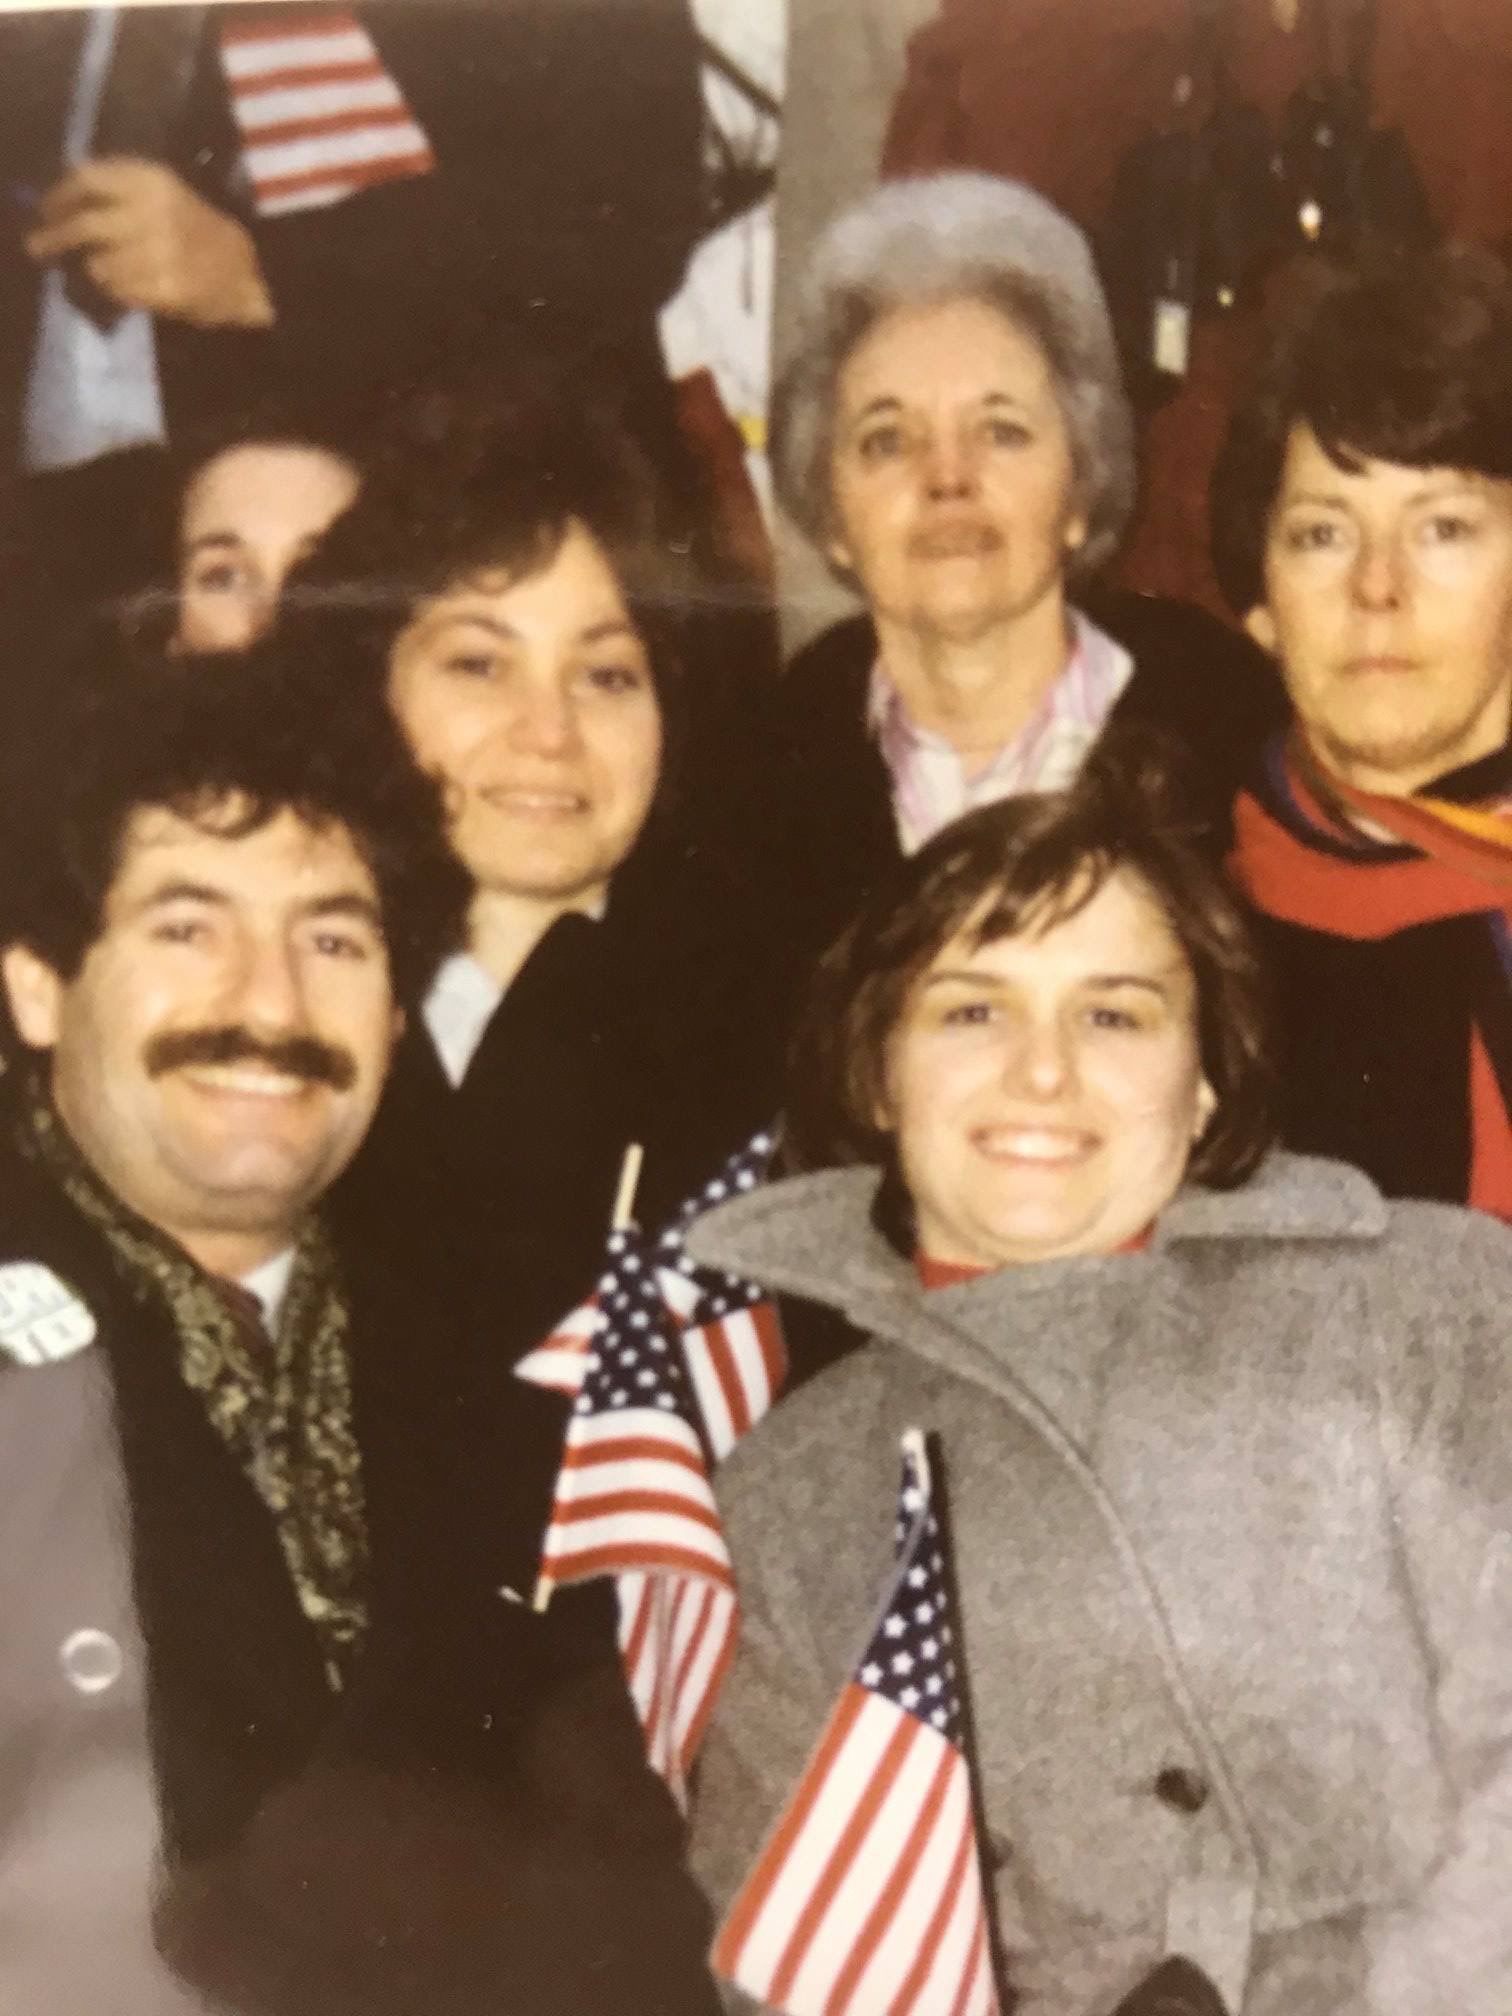  Presidential Inauguration – Joseph Forstadt, Betsy Ring, Connie Whitton, Barbara Wortley, Catherine Bertini and Nancy Thompson (1981) 